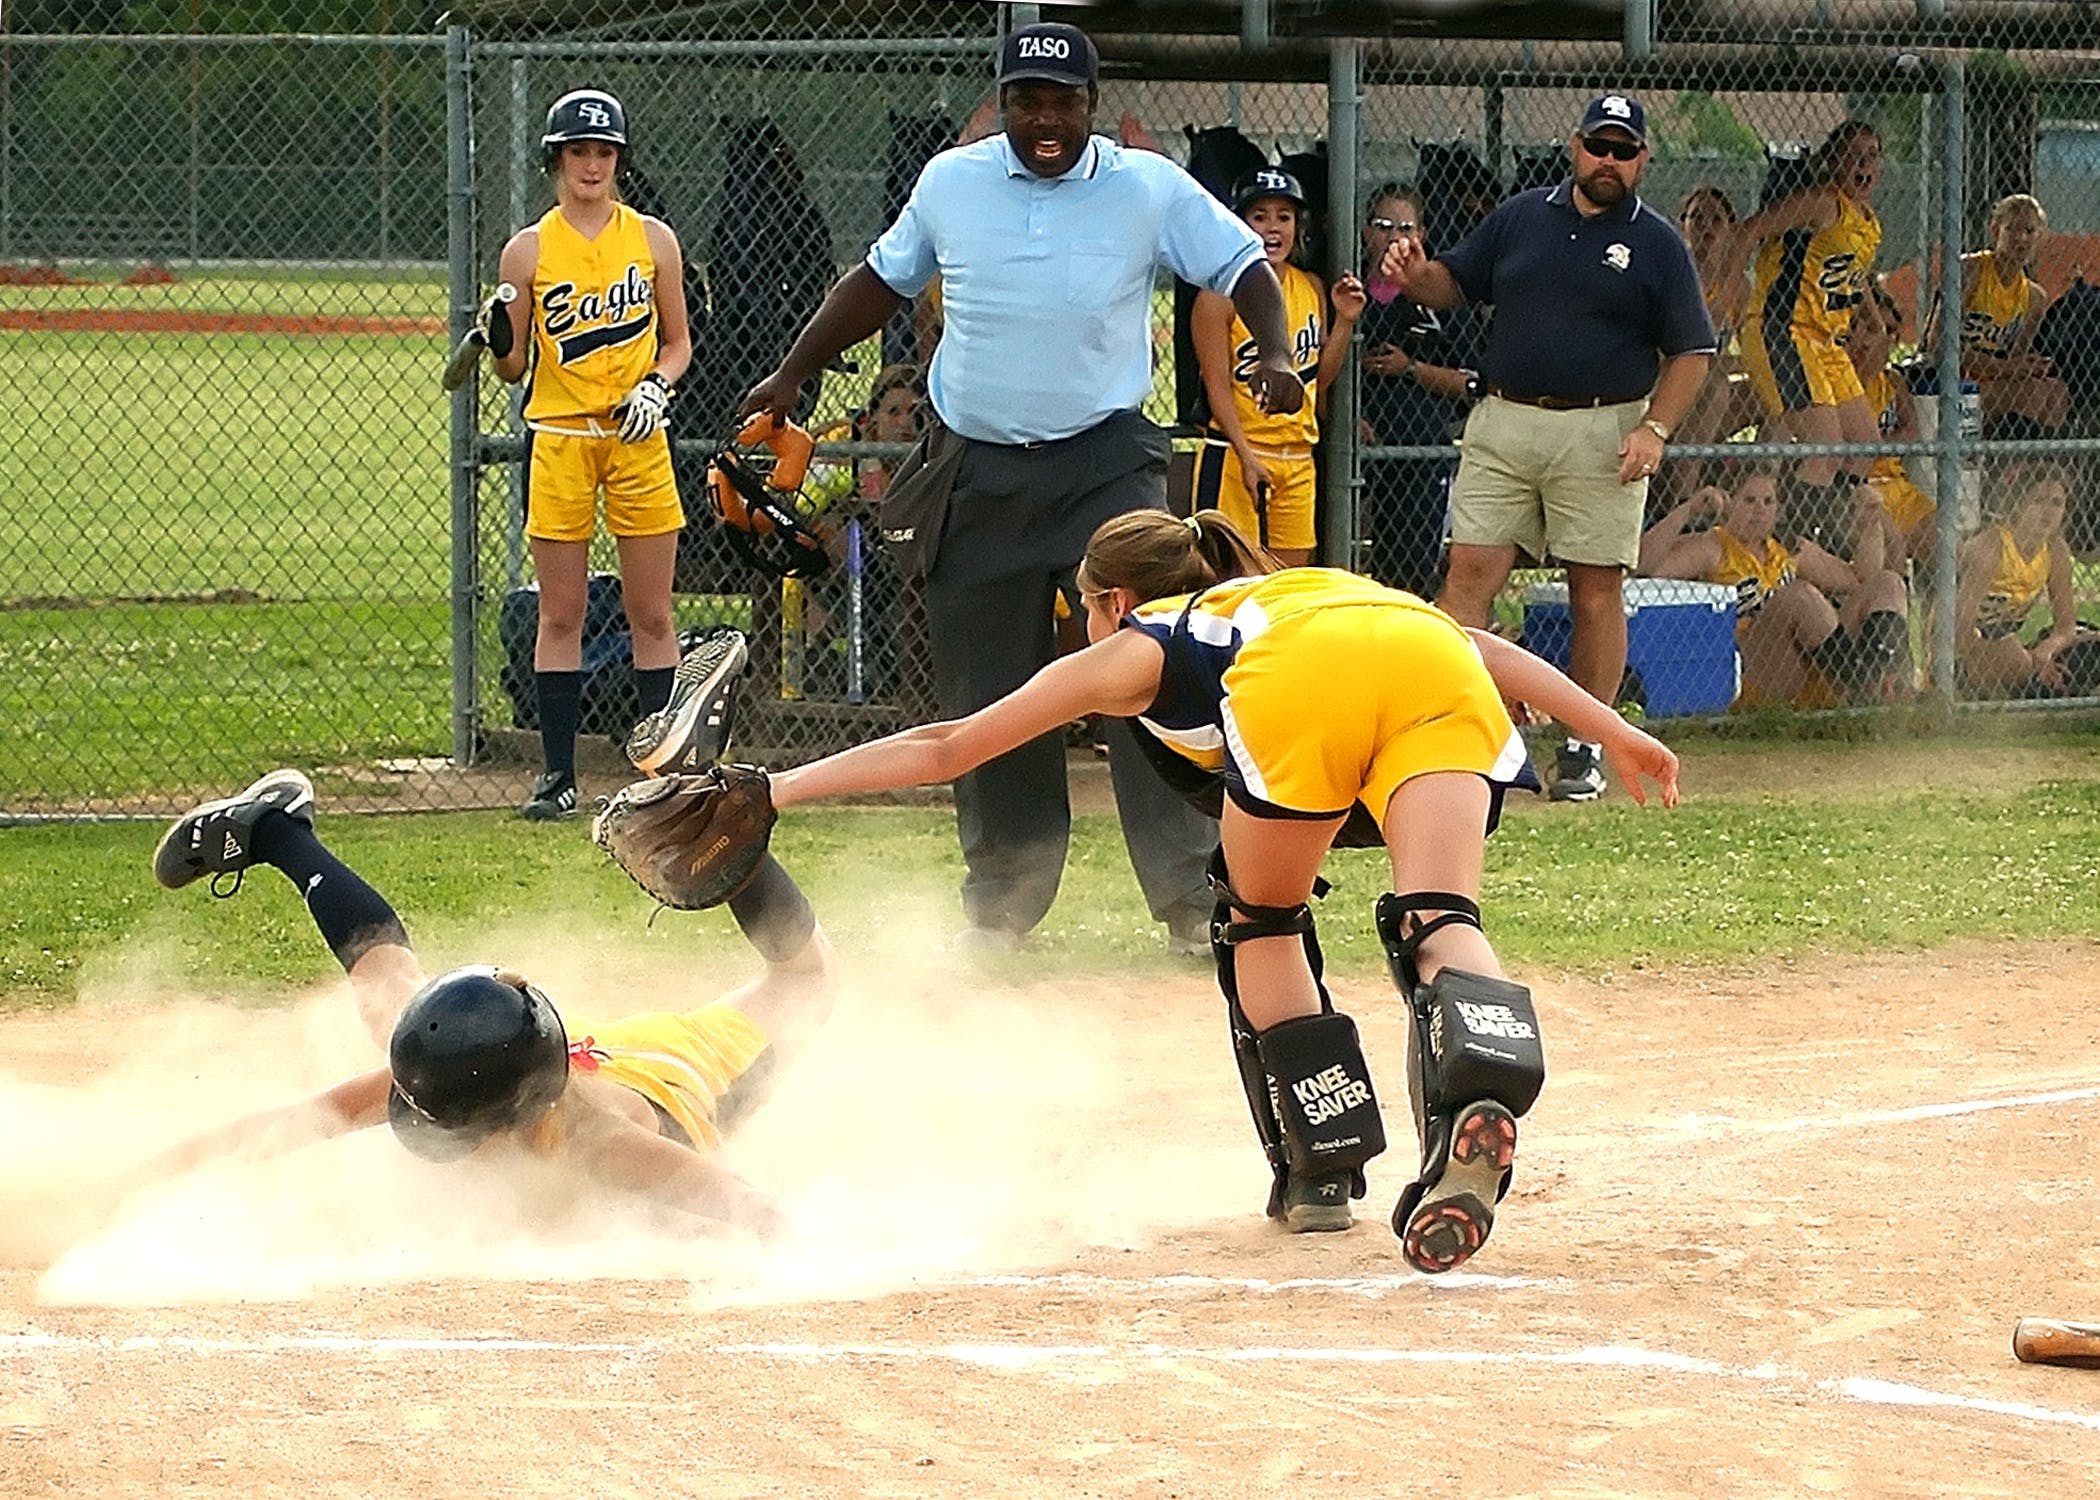 Softball player tagging girl out at plate